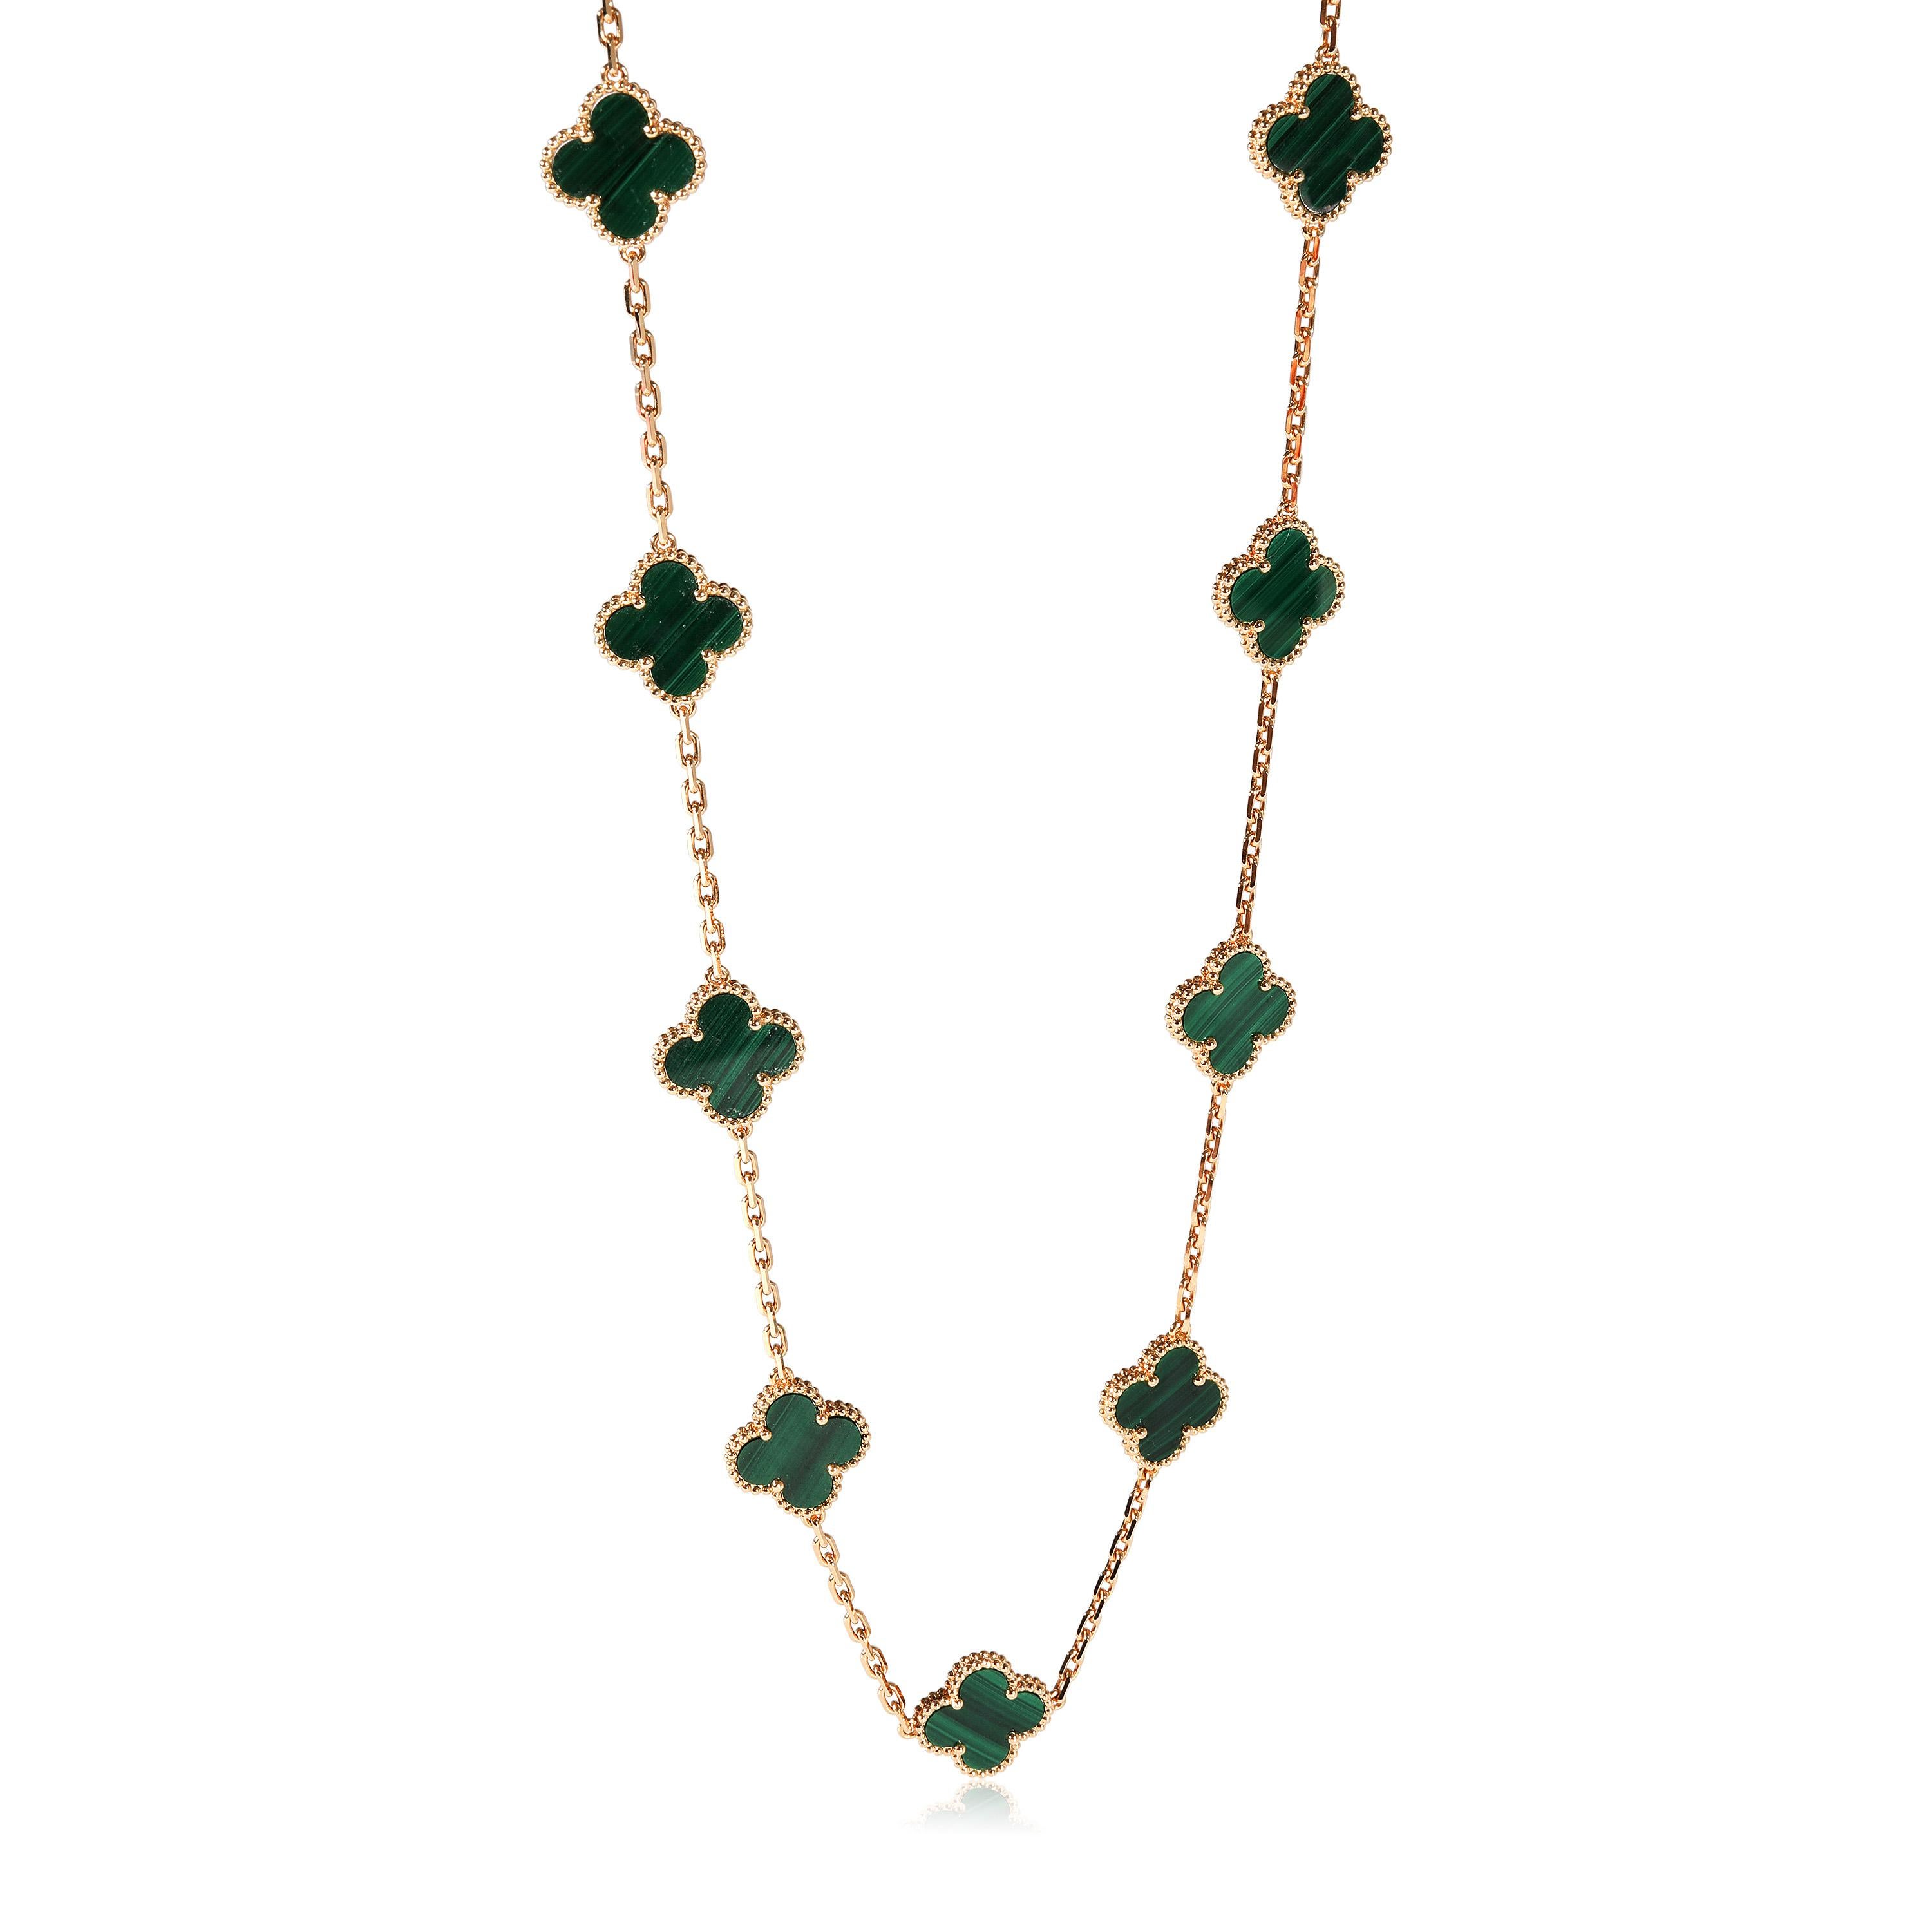 Van Cleef & Arpels Alhambra Vintage Malachite Necklace in 18K Yellow Gold

PRIMARY DETAILS
SKU: 122149
Listing Title: Van Cleef & Arpels Alhambra Vintage Malachite Necklace in 18K Yellow Gold
Condition Description: Retails for 18500 USD. In